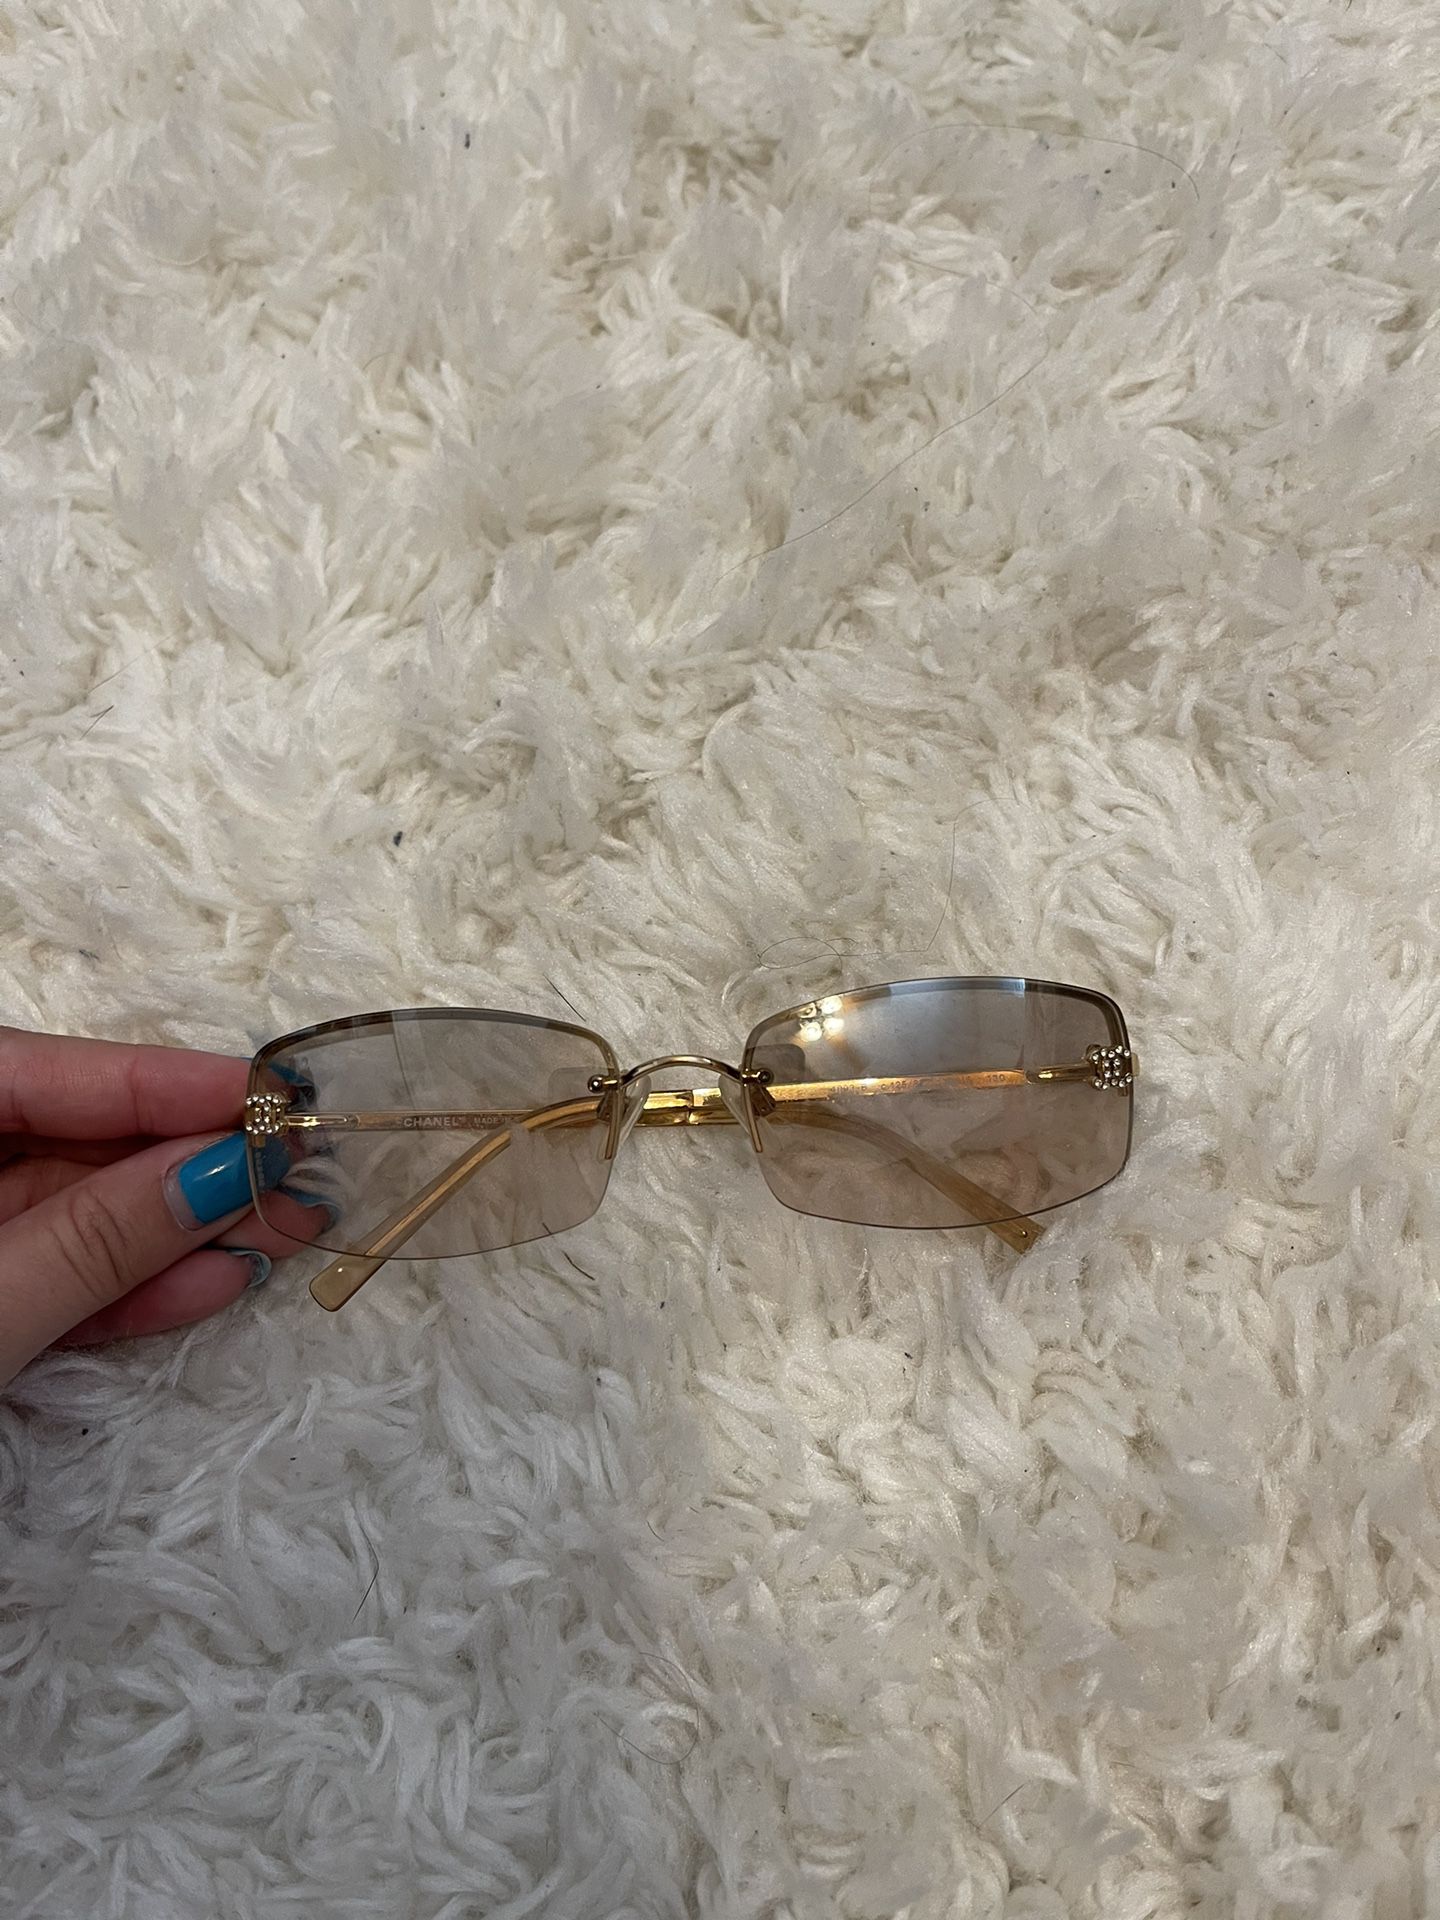 Vintage Chanel Sunglasses for Sale in Clovis, CA - OfferUp